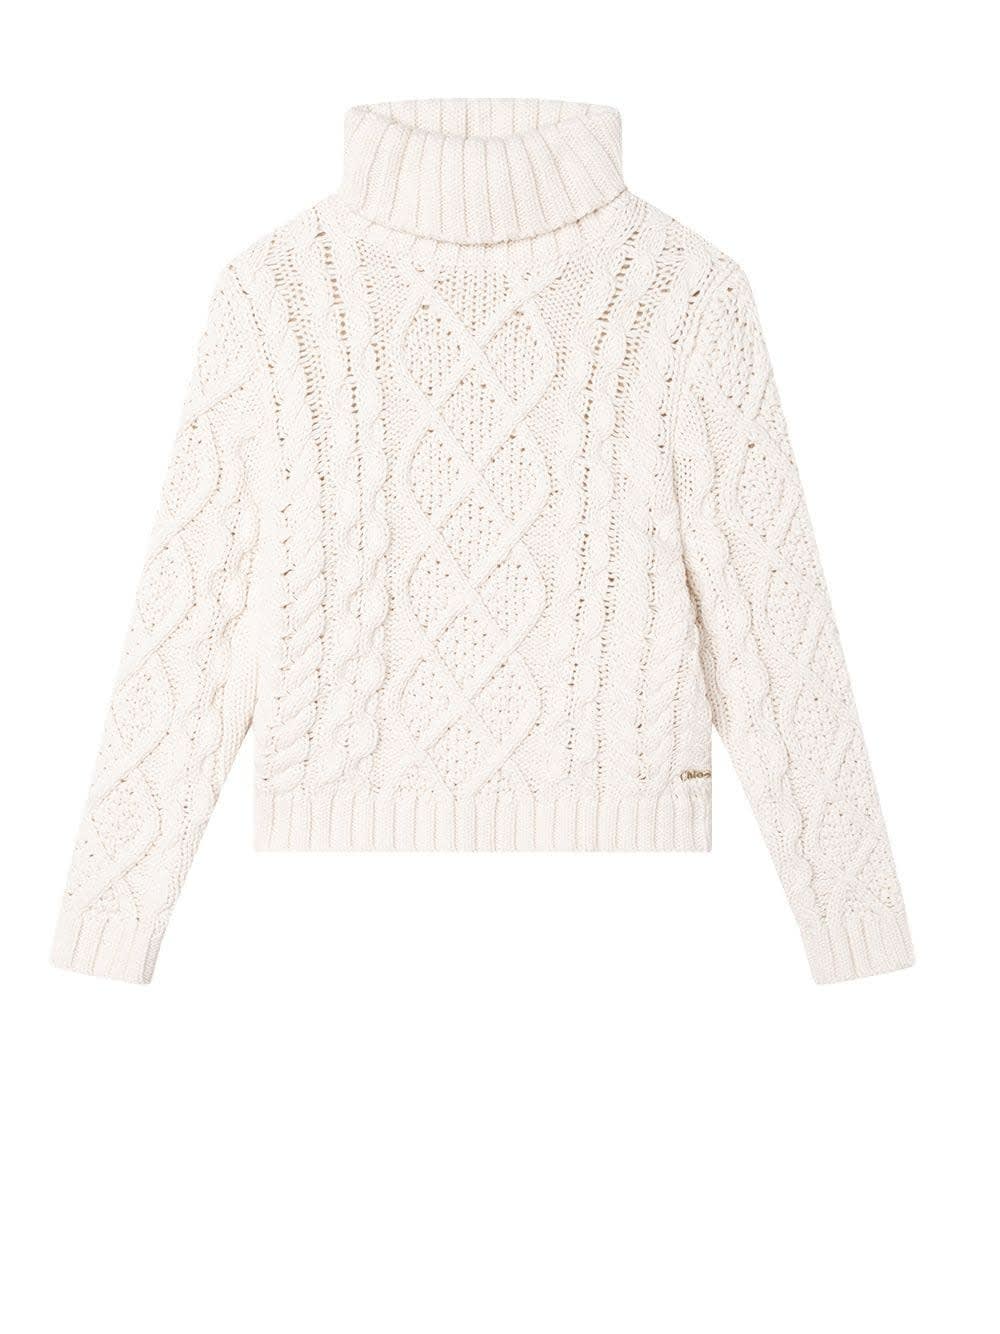 Chloé Kids Turtleneck Sweater In White Braided Cotton And Wool